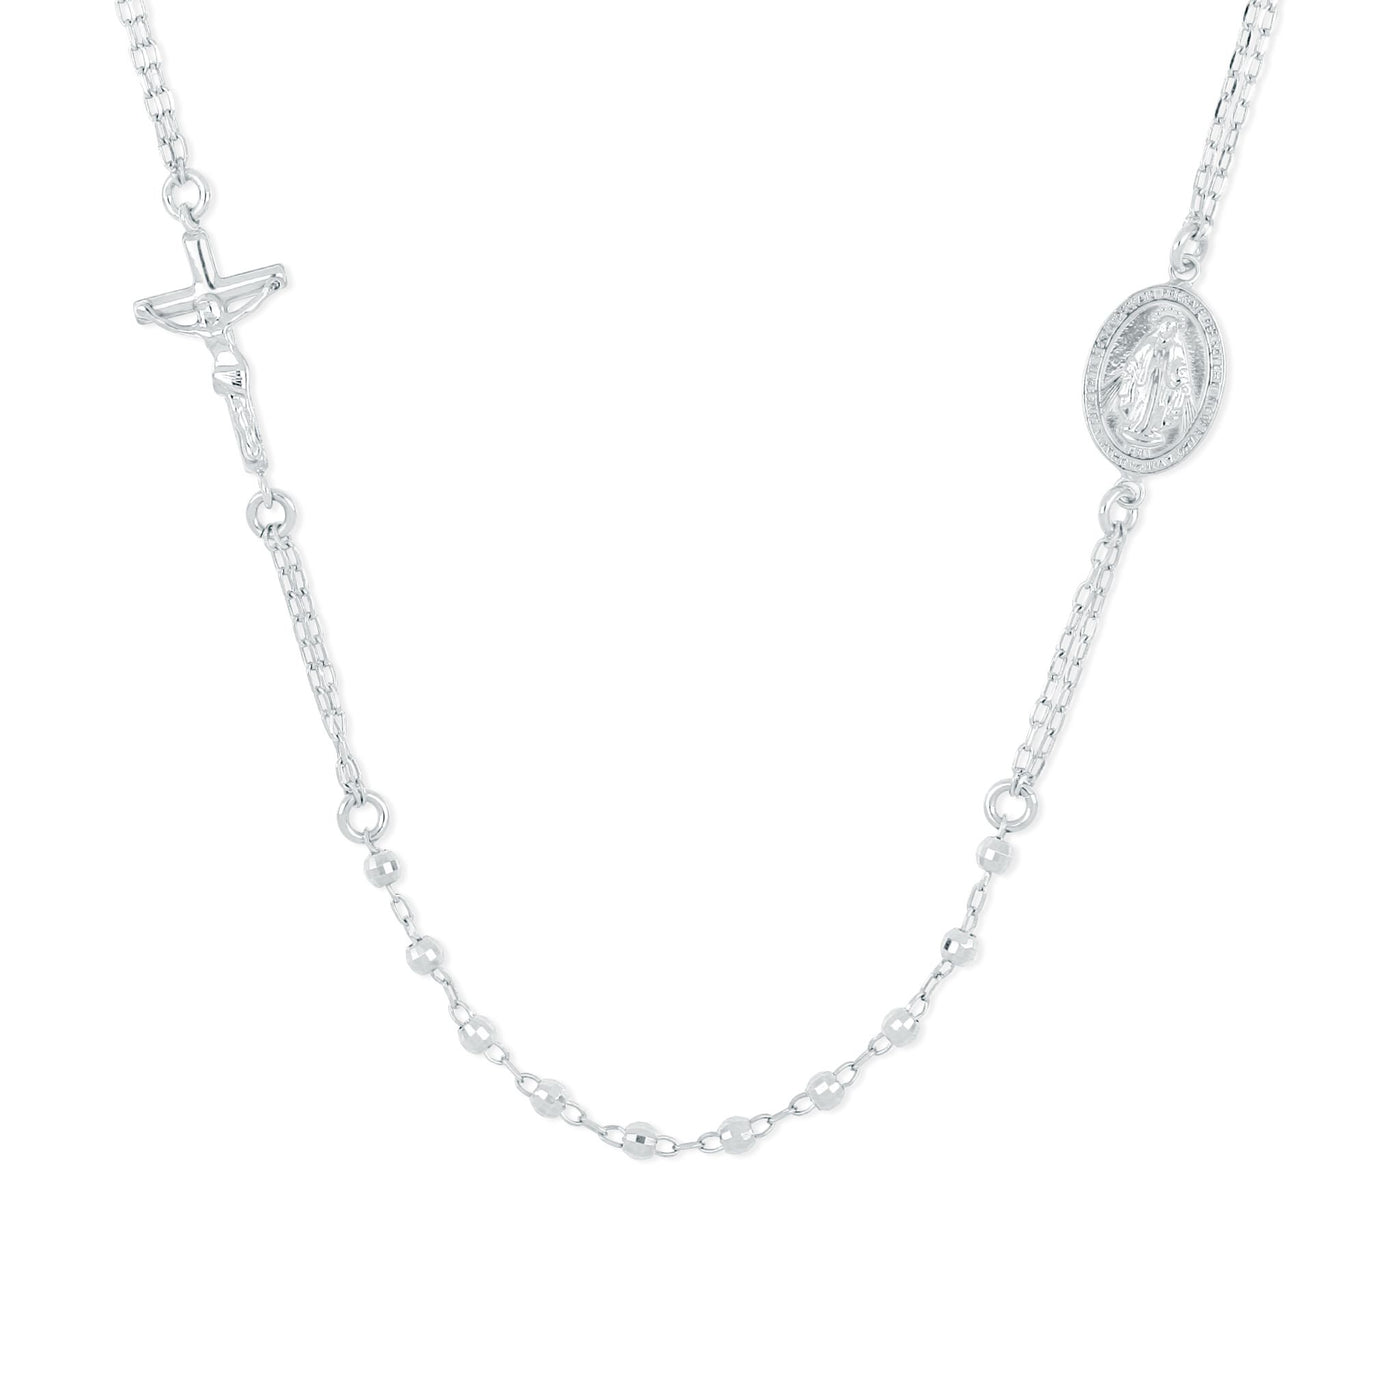 Rebecca Sloane Sterling Silver Rosary Beaded Necklace with Miraculous